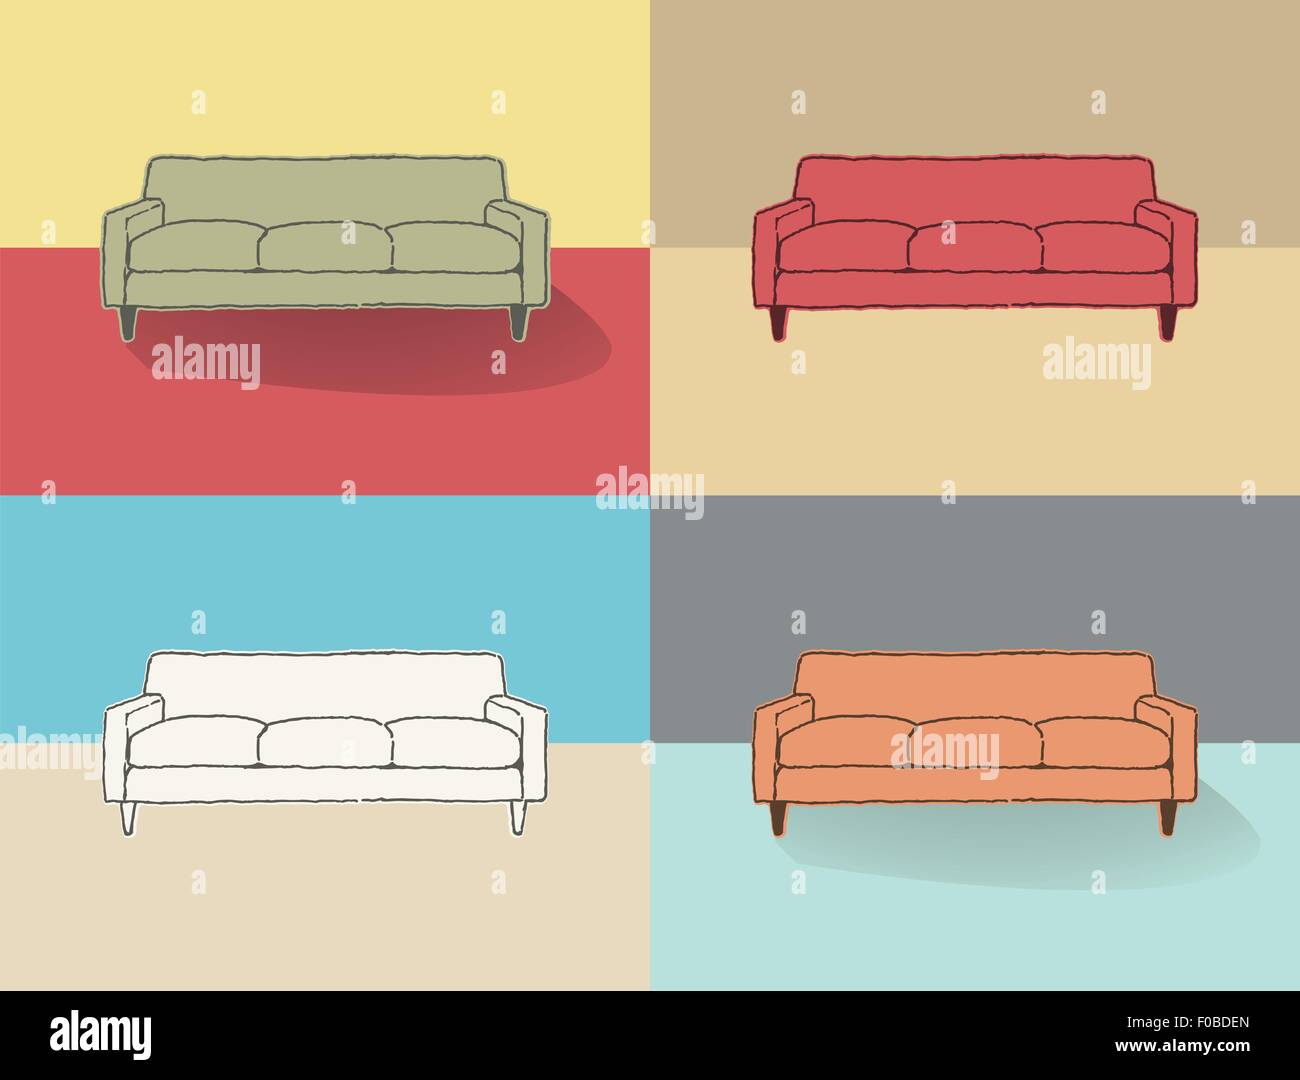 simply elegant couch drawing in four color solution Stock Photo